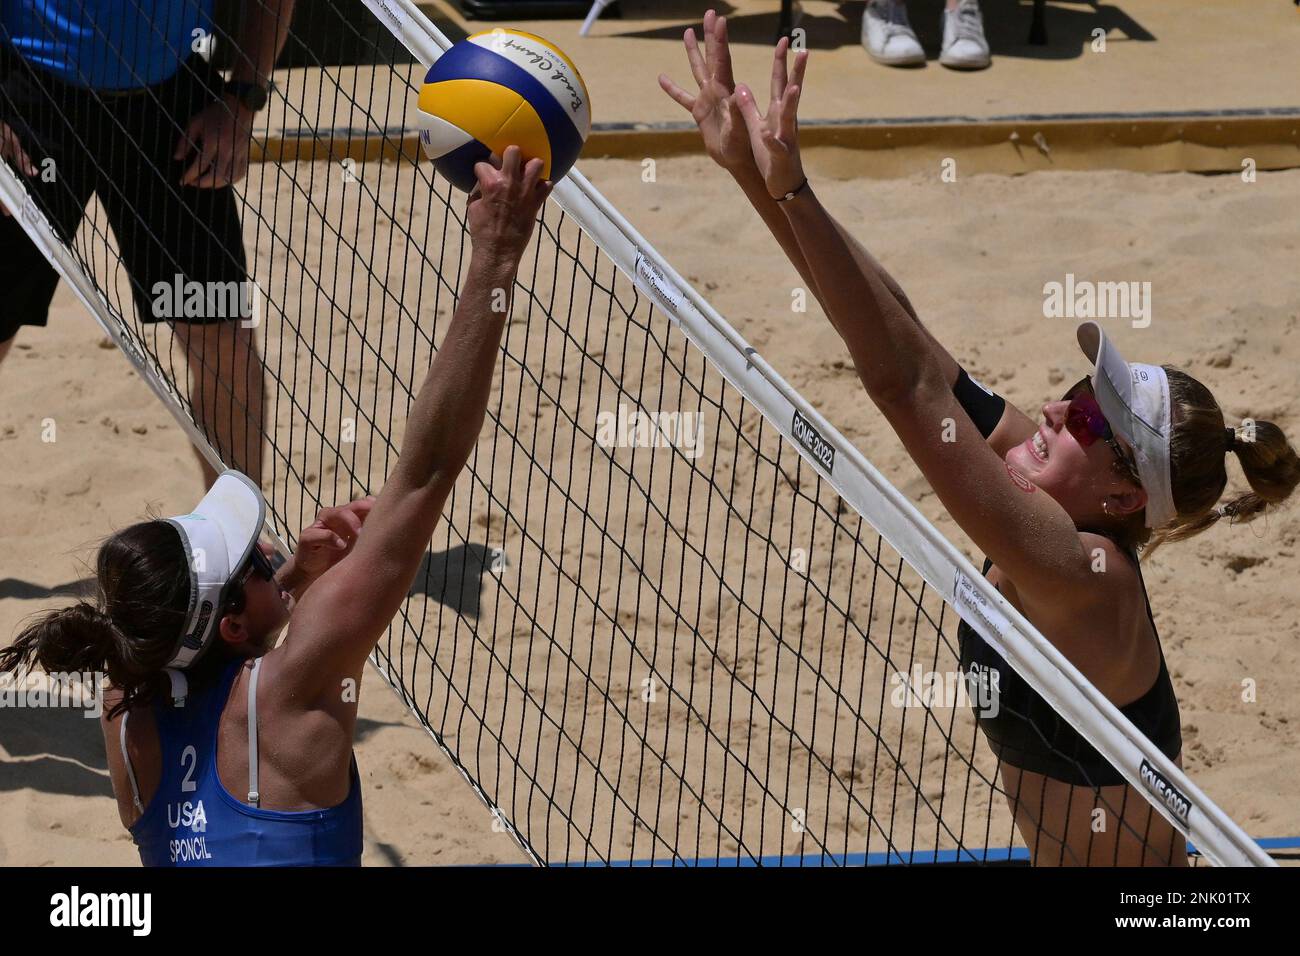 United States Sarah Sponcil, left, and teammate Terese Cannon react after winning a point during their match against Cuba at the Beach Volleyball World Championships in Rome, Friday, June 10, 2022